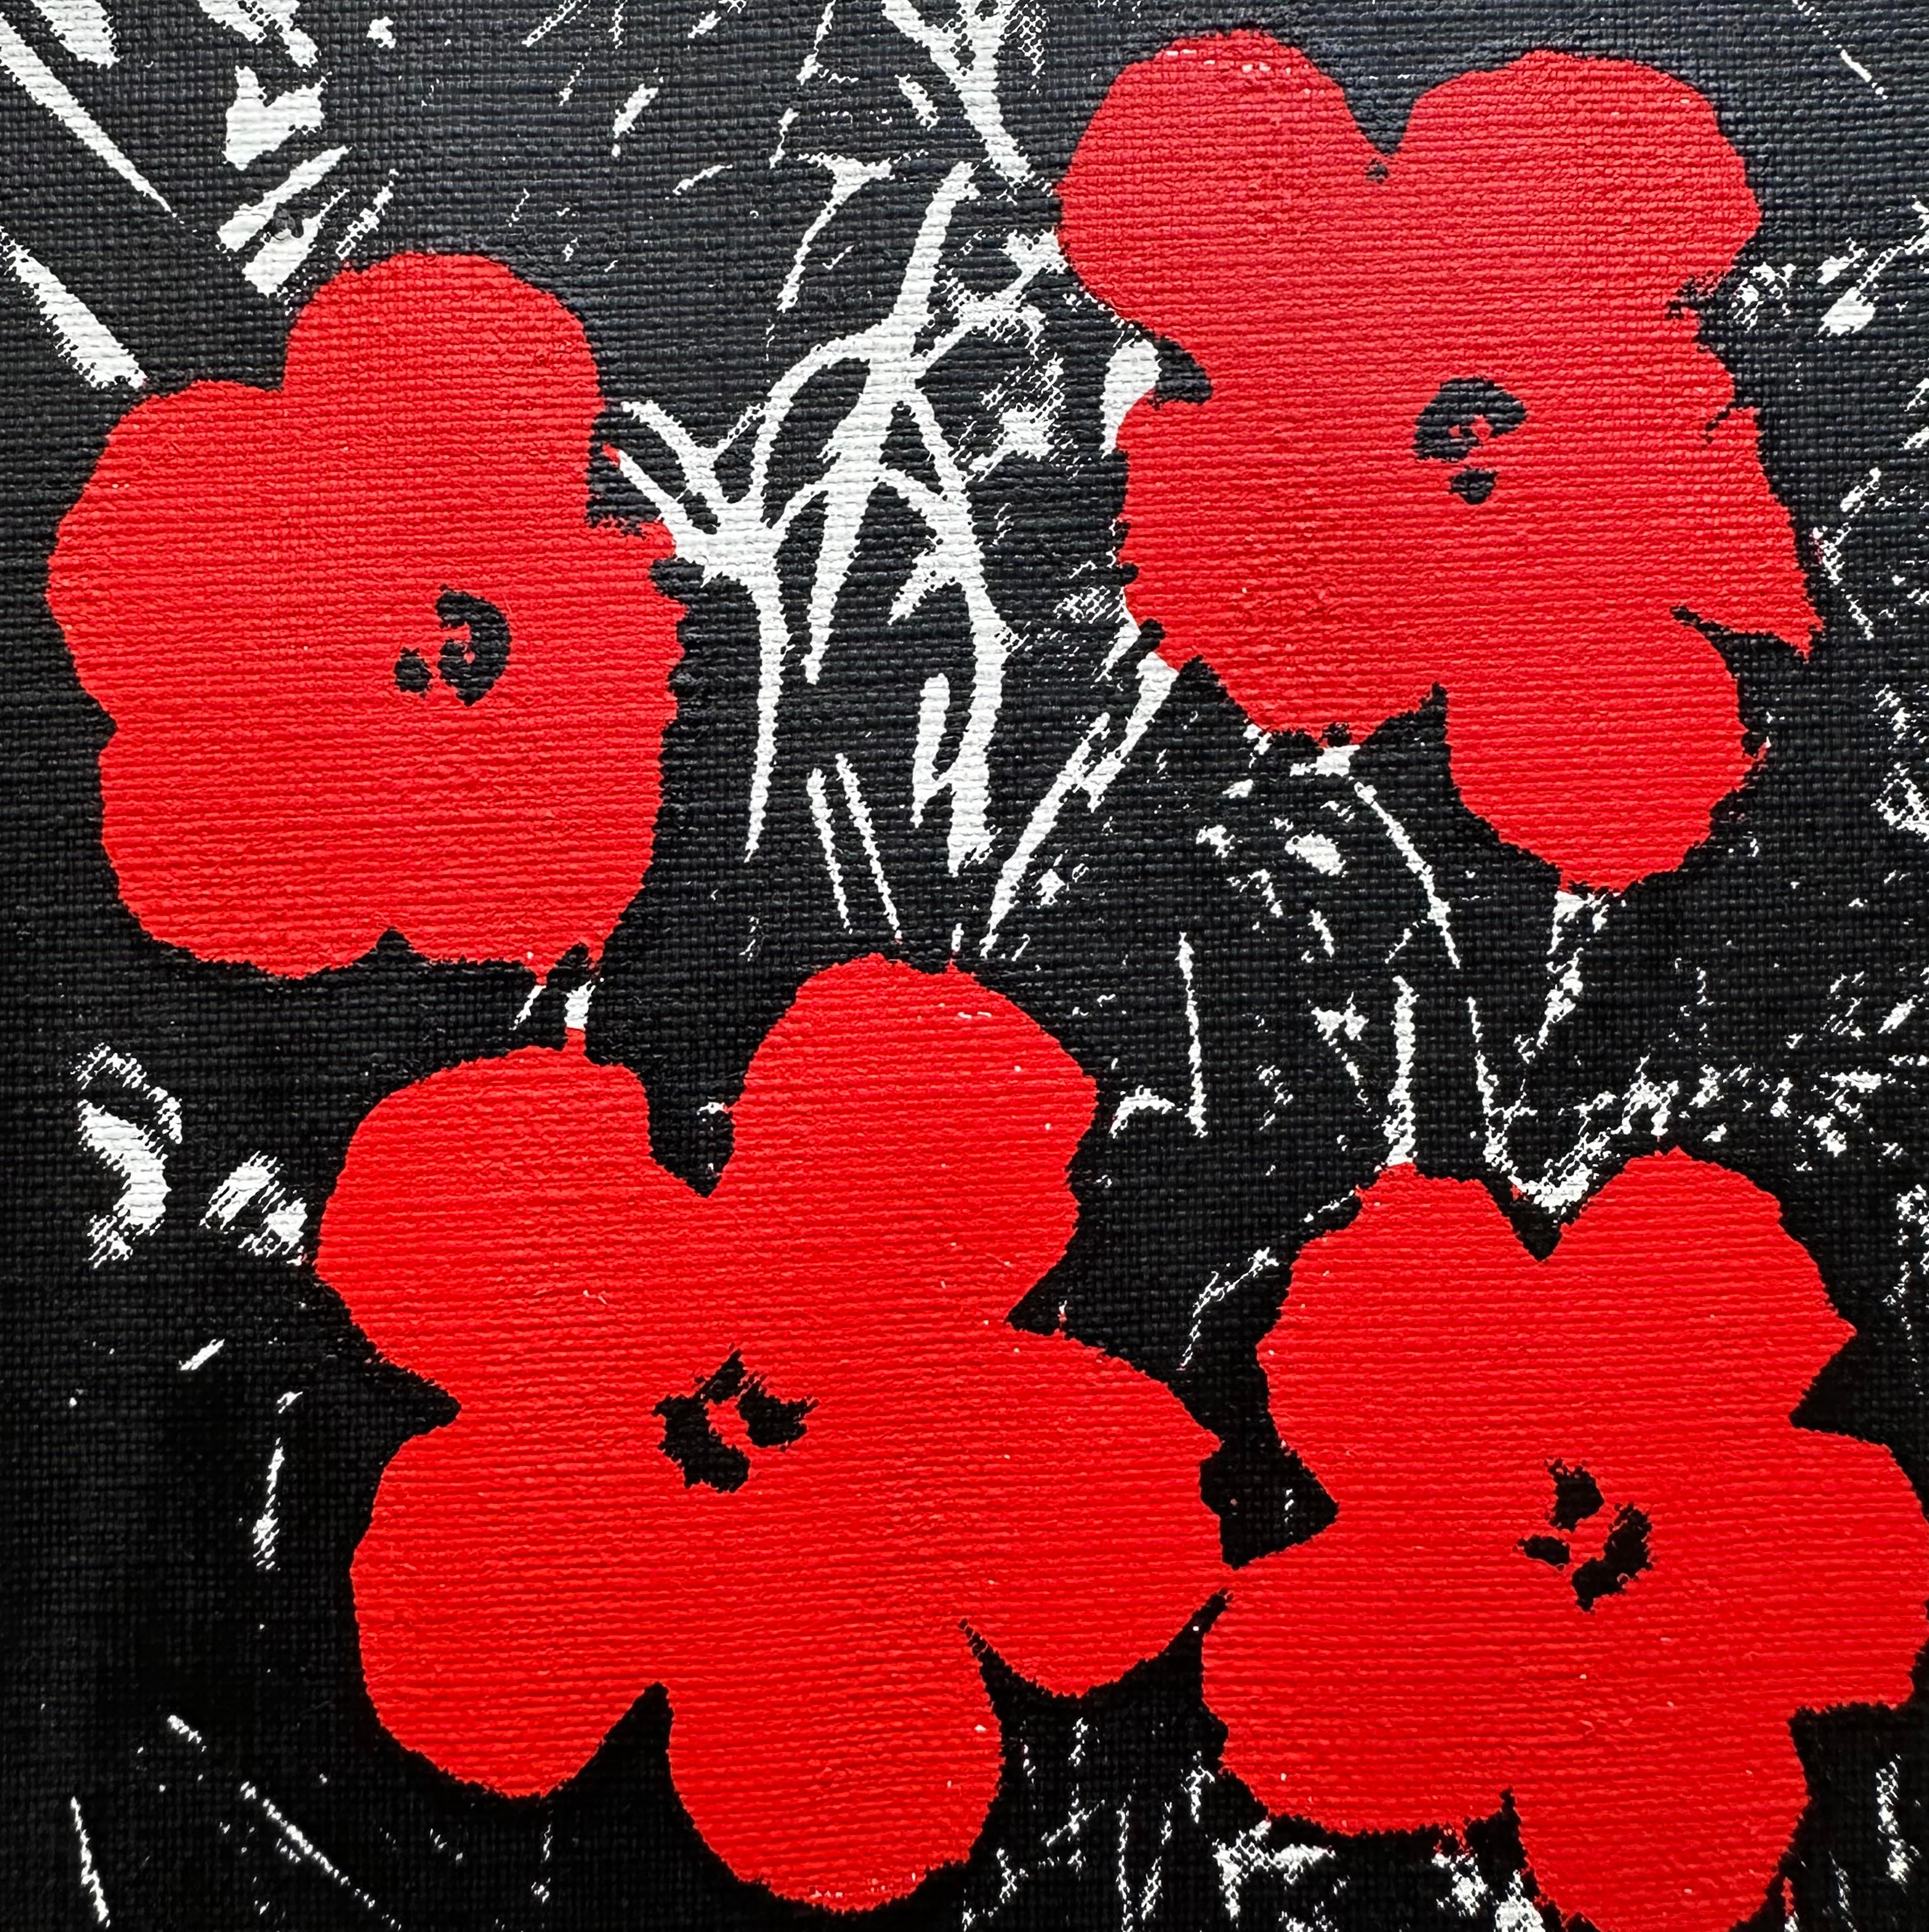 Denied Warhol Flowers, (Red) Silkscreen Painting by Charles Lutz
Silkscreen and acrylic on canvas with Denied stamp of the Andy Warhol Art Authentication Board.
5 x 5" inches
2008

Lutz's 2007 ''Warhol Denied'' series gained international attention